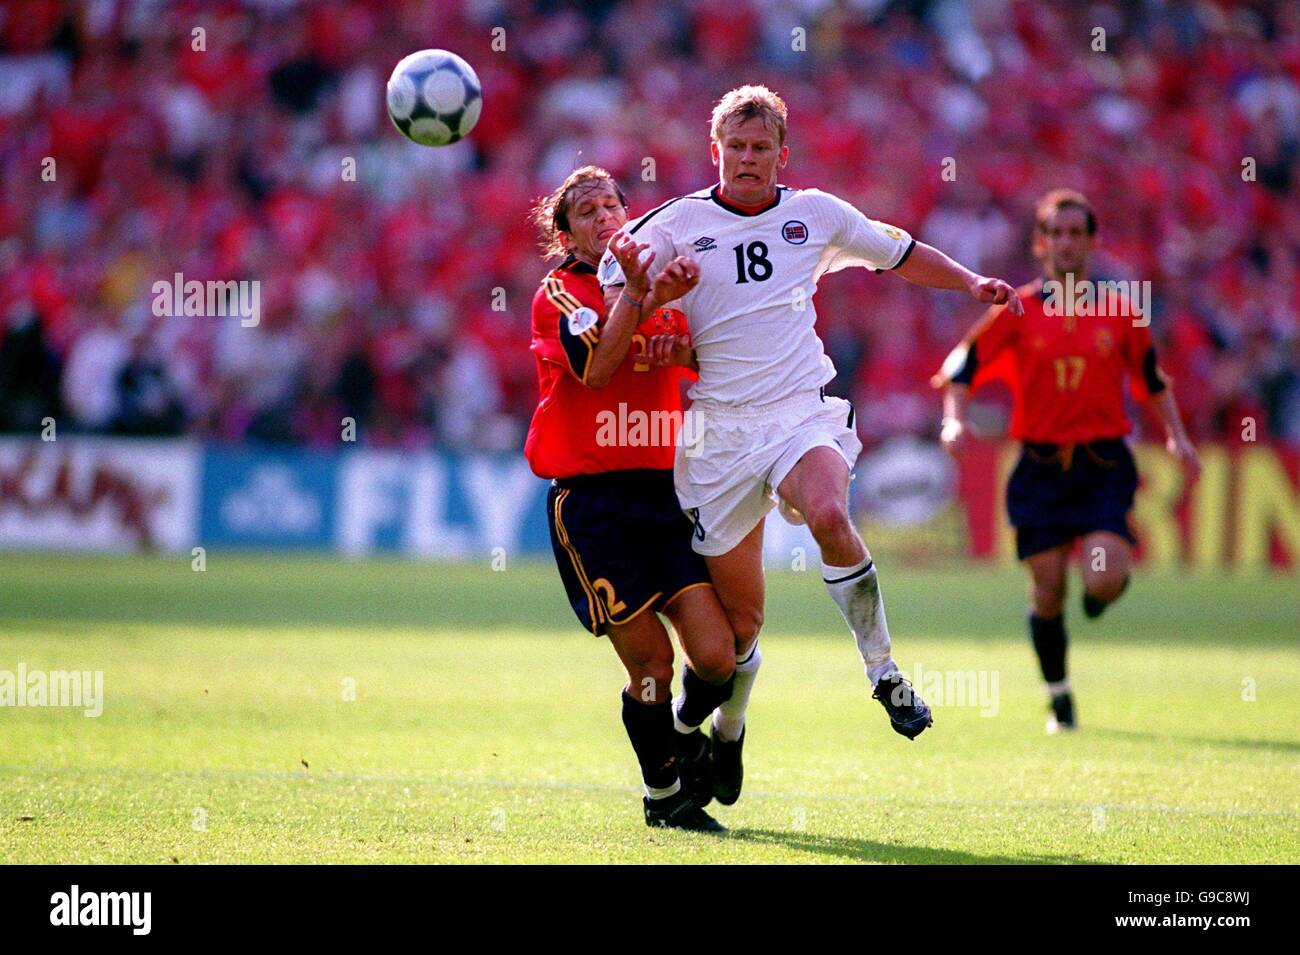 (L-R) Spain's Michel Salgado is brushed aside by Norway's Steffen Iversen in a chase for the ball Stock Photo